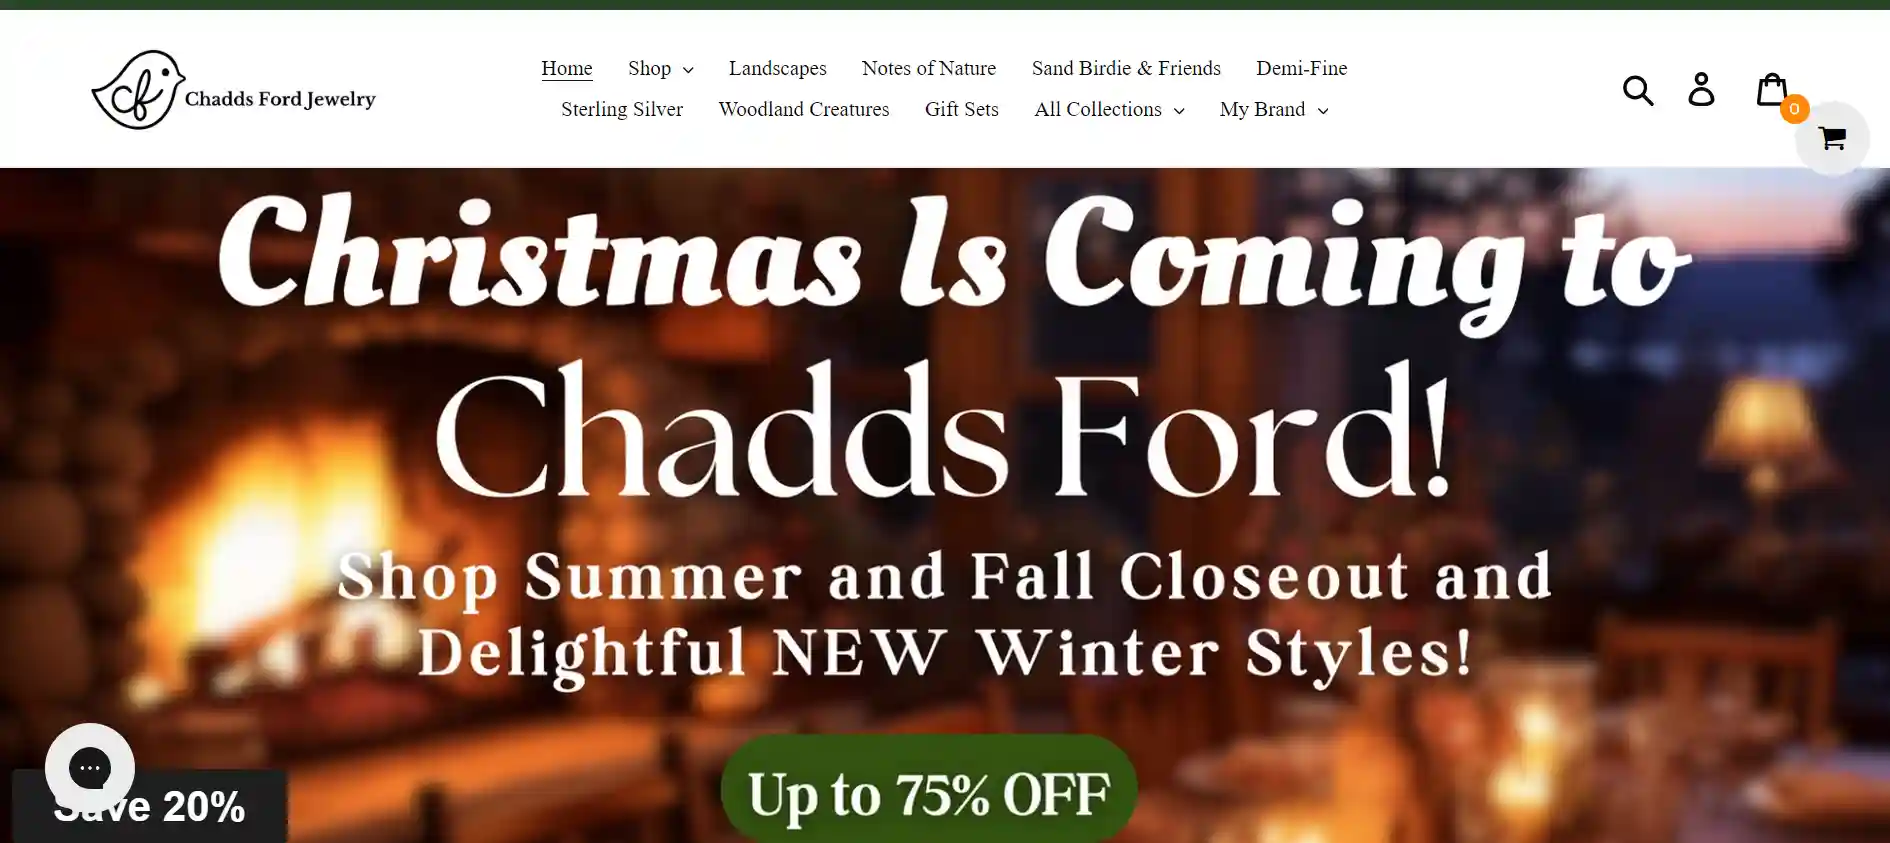 You are currently viewing Chadds Ford Jewelry: Comprehensive Reviews & Ratings